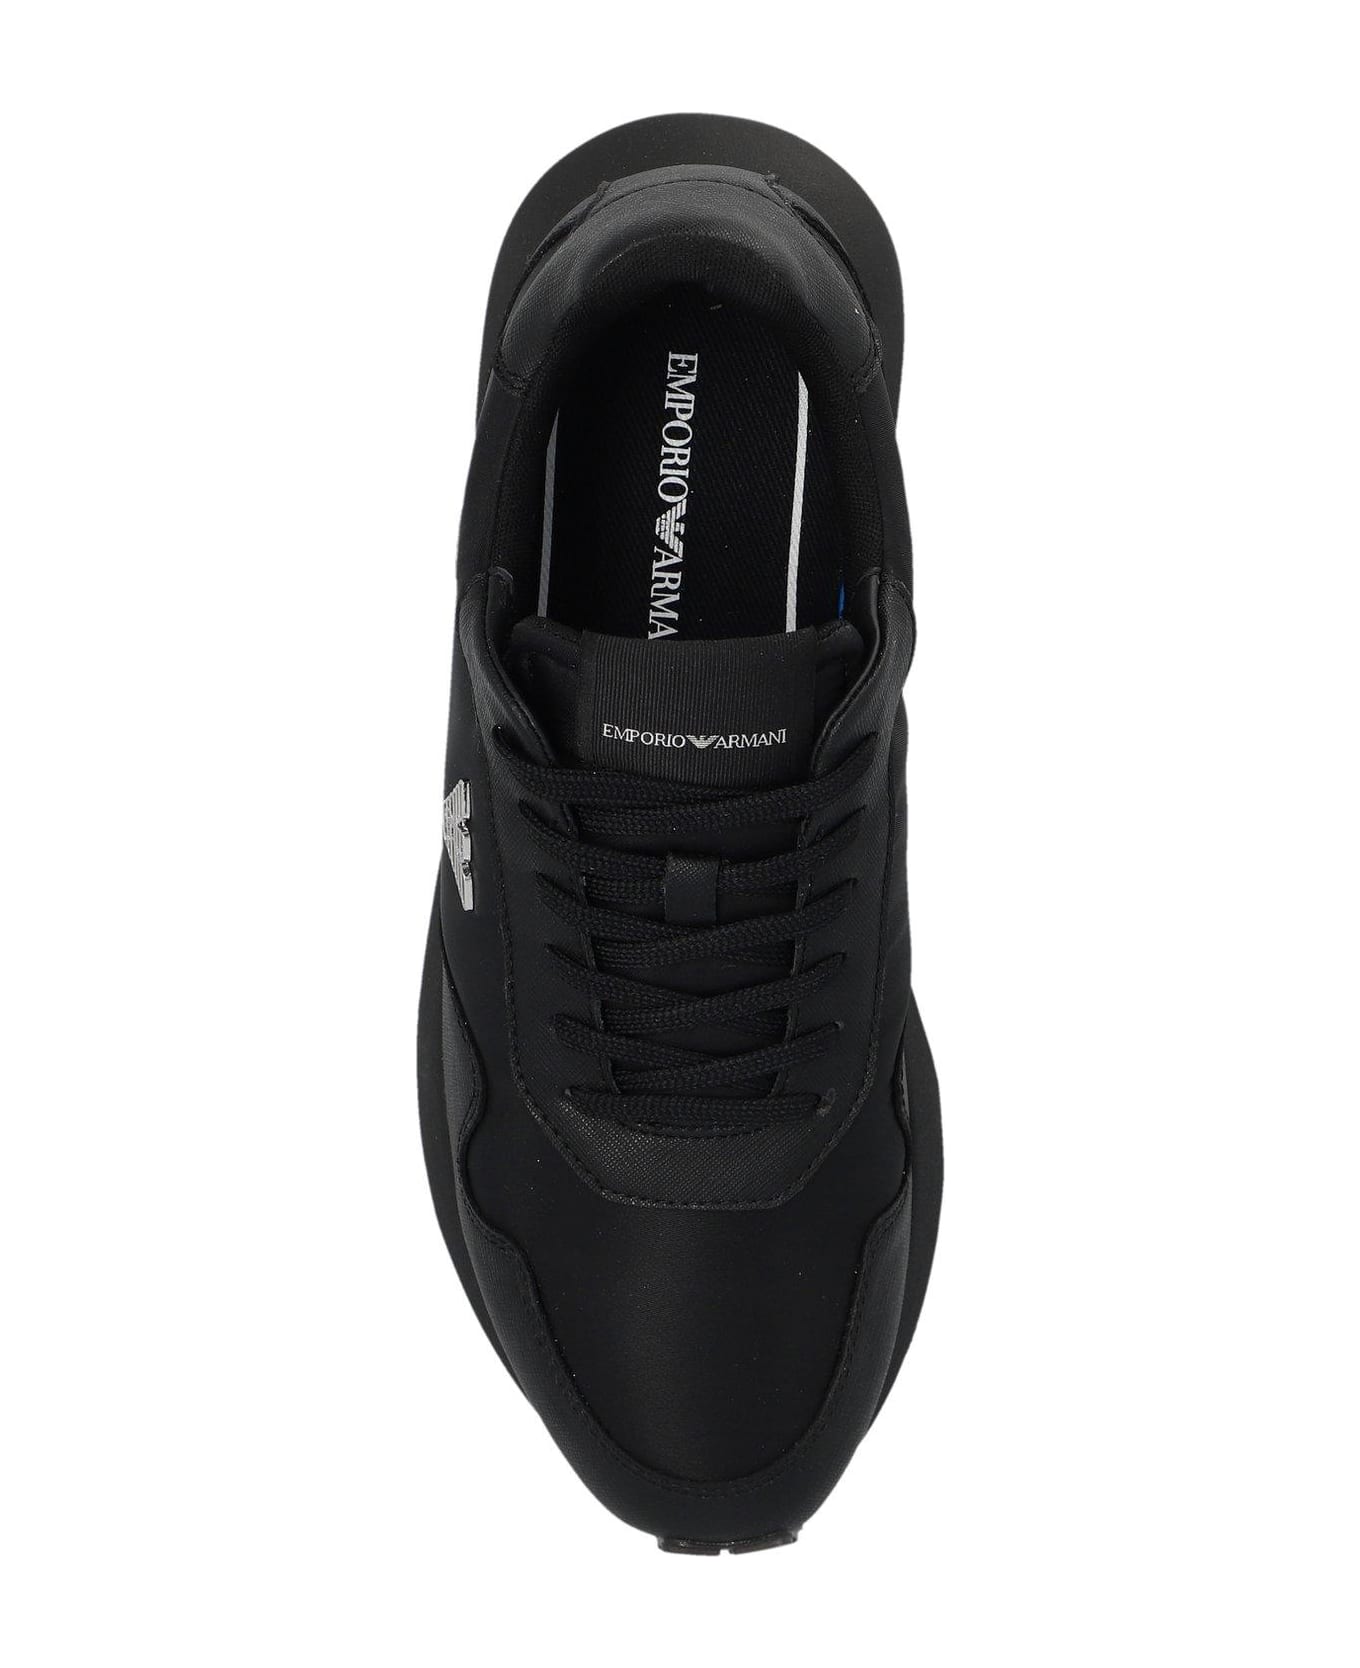 Emporio Armani Sustainability Low-top Sneakers - Black スニーカー